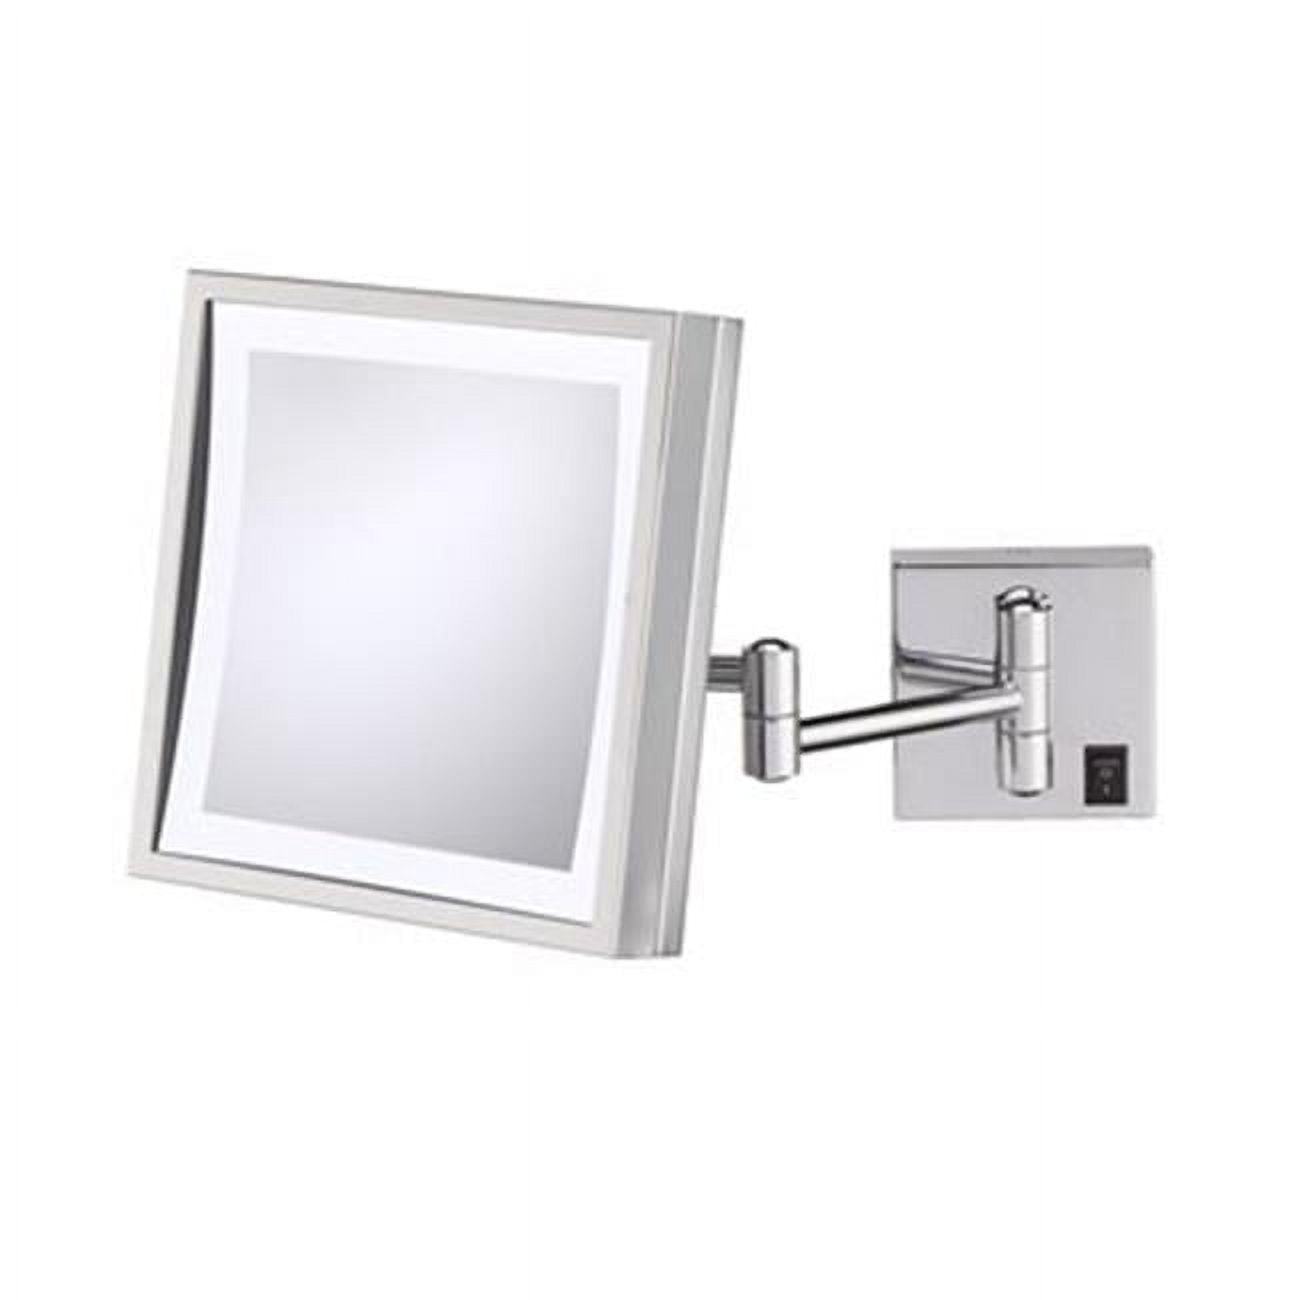 Aptations 913-55-43 Single-sided Led Square Wall Mirror - Rechargeable, Chrome